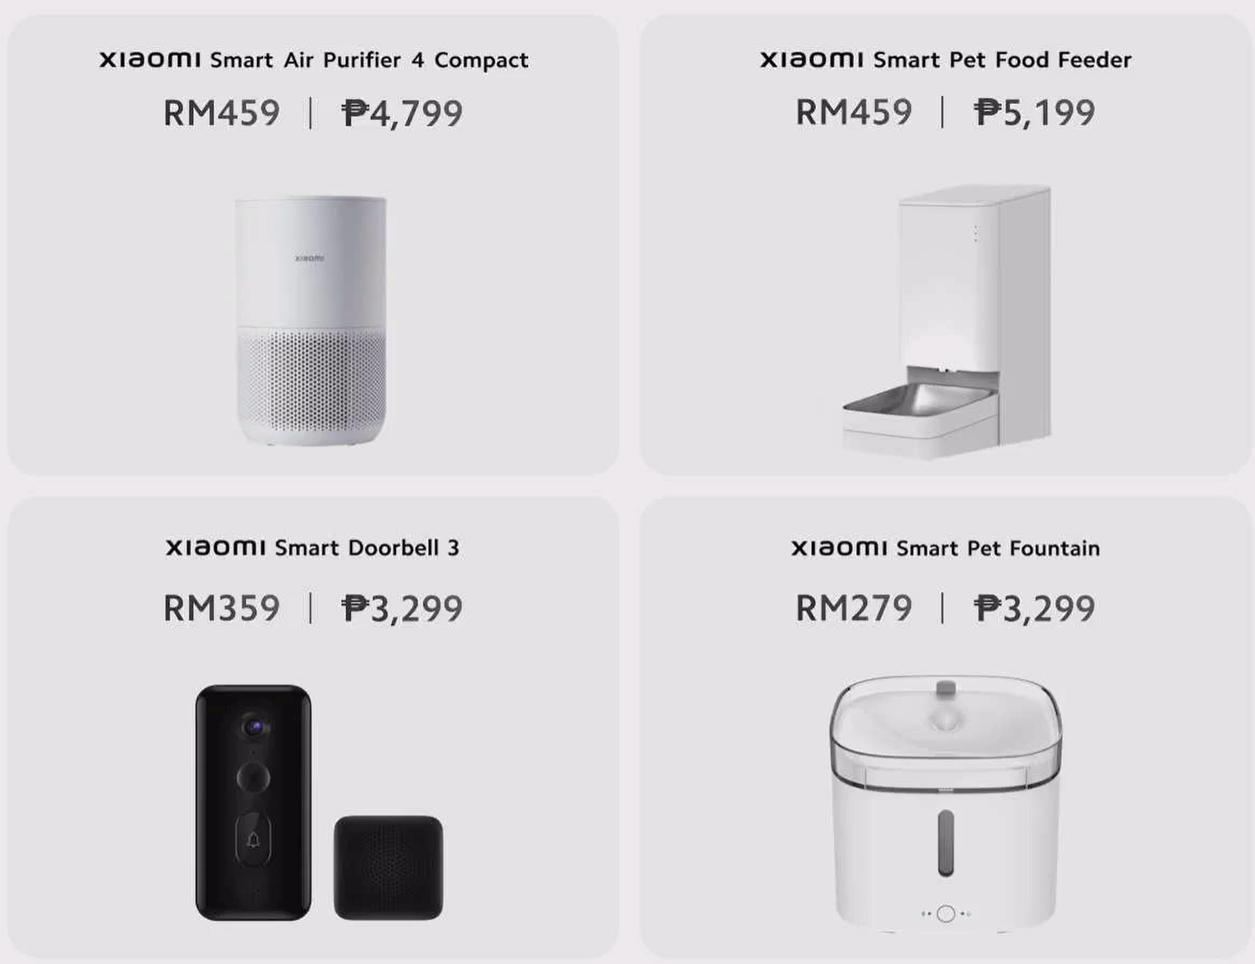 Xiaomi Smart Home Devices